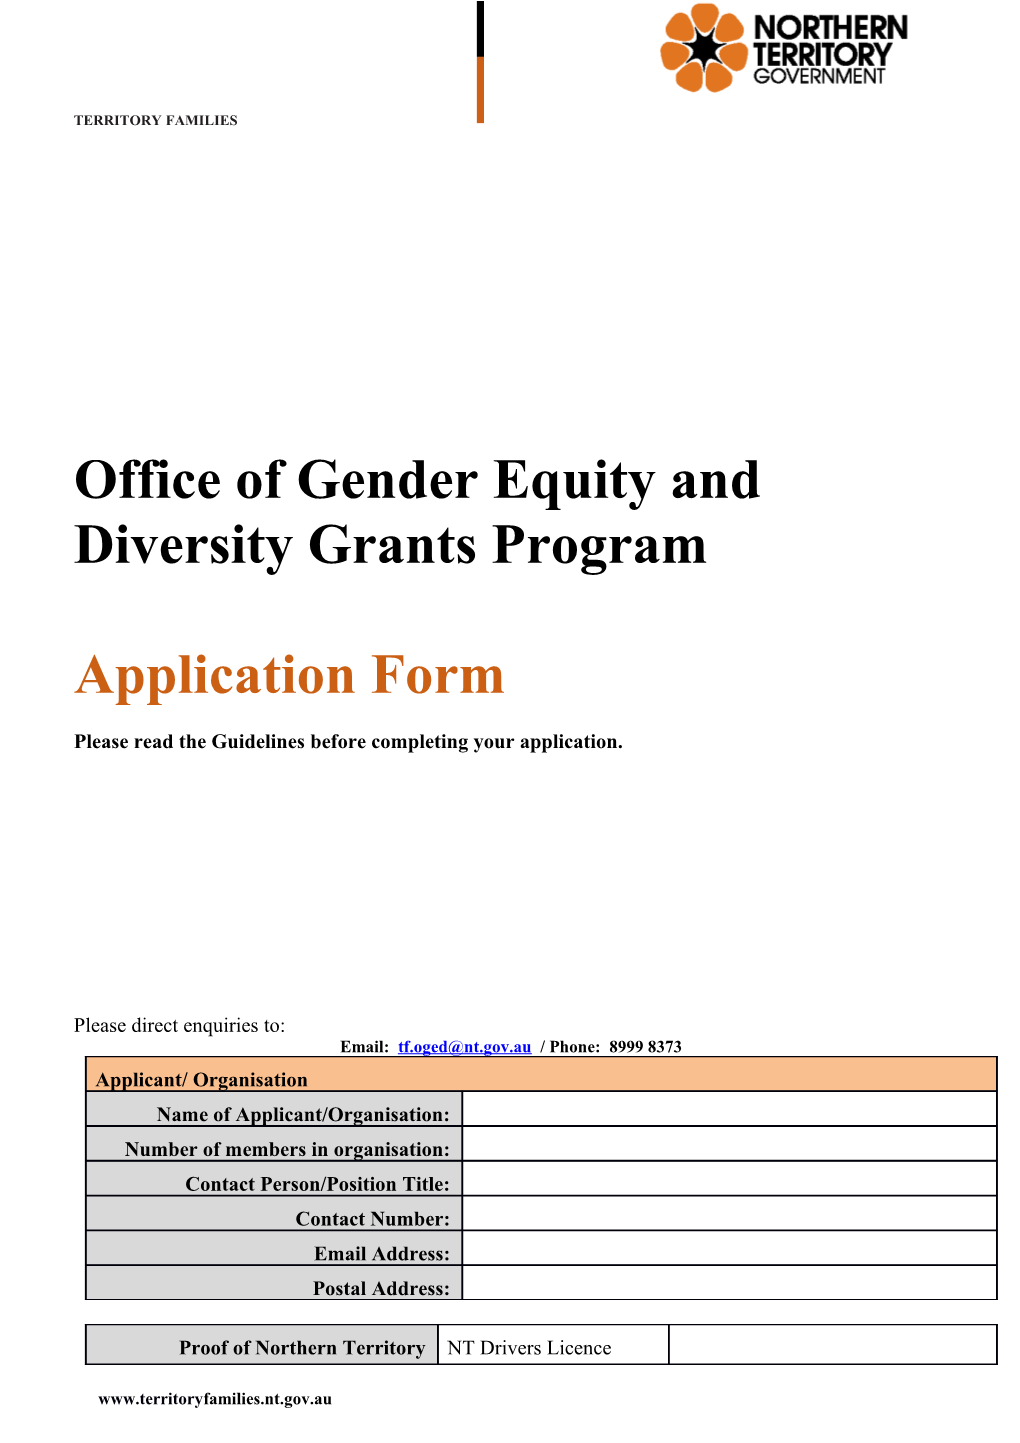 Office and Gender Equity and Diversity Grant Application Form